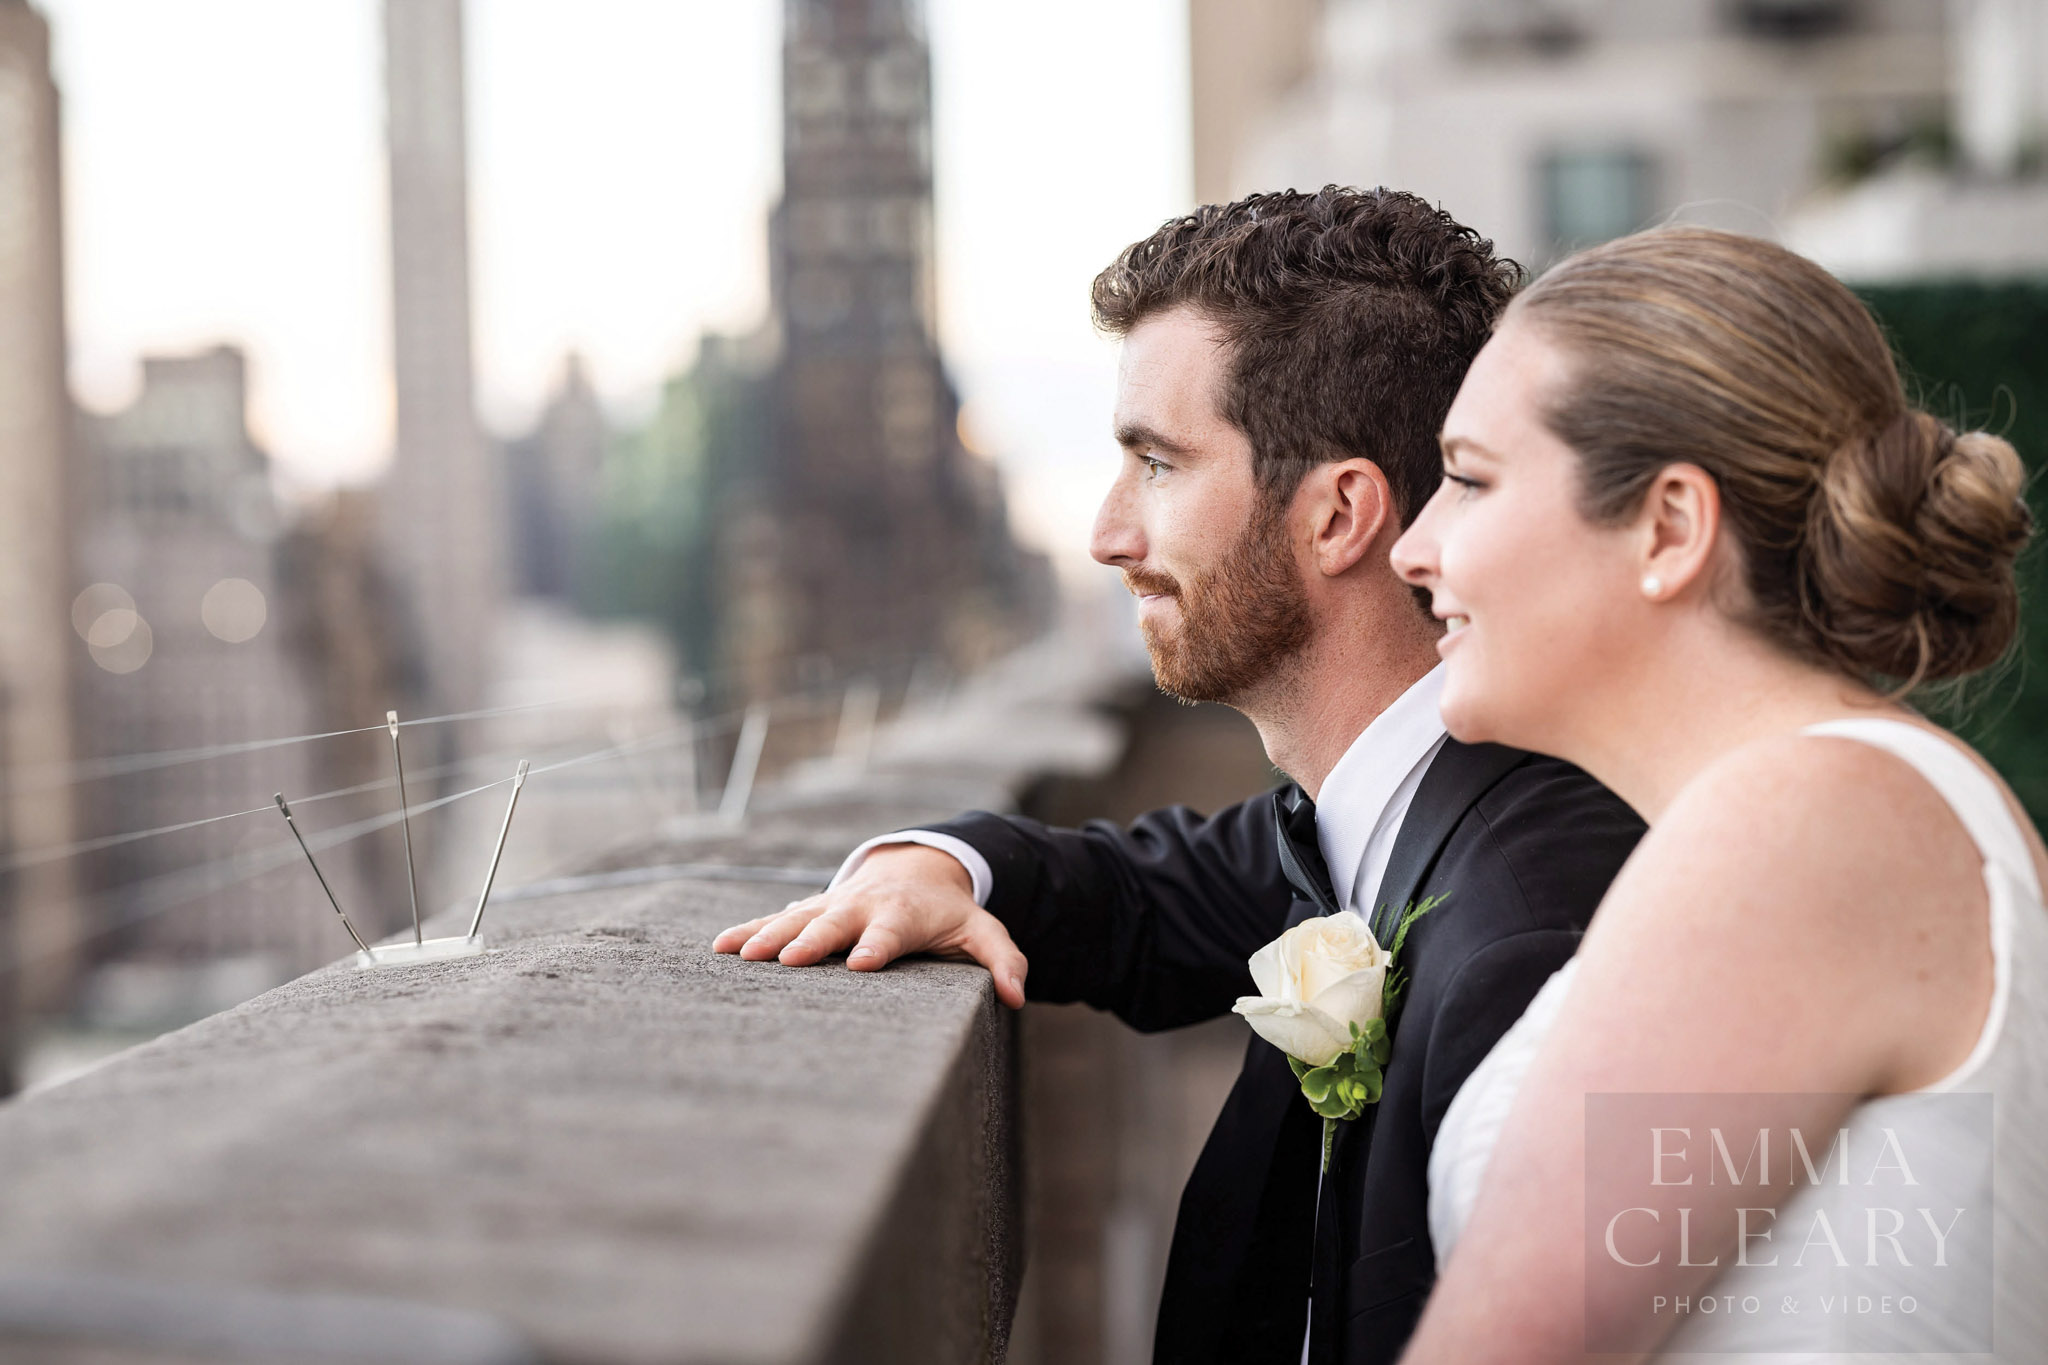 The bride and groom admire the view